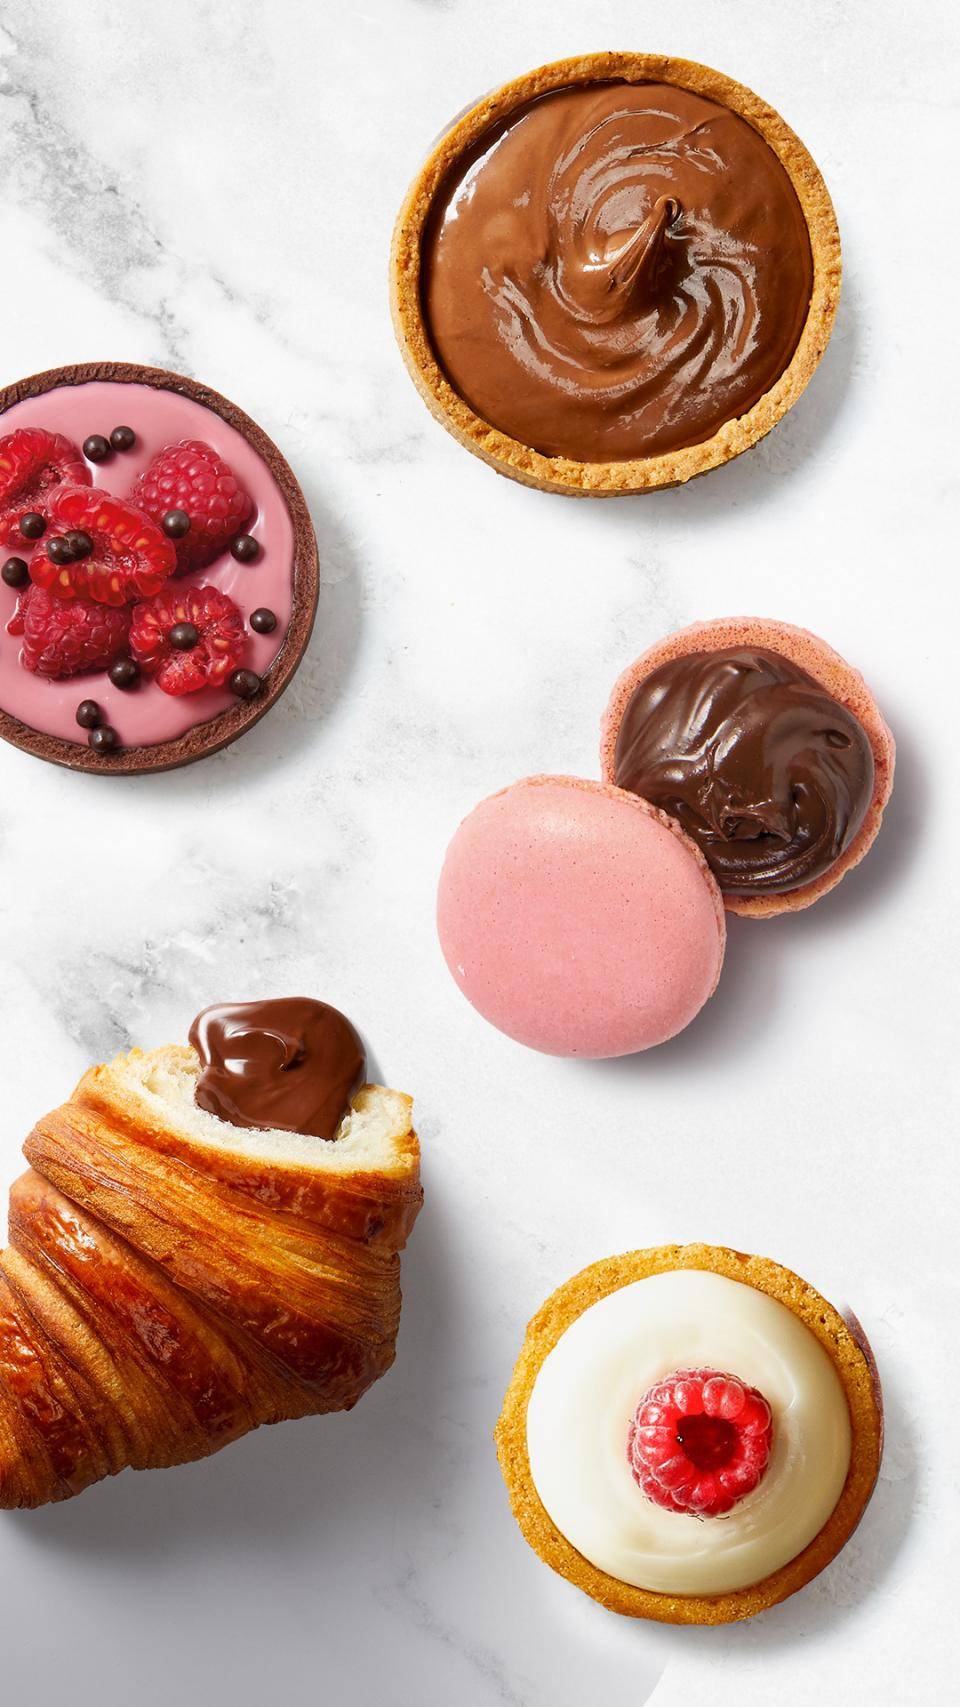 A variety of filled bakery products: croissants, tarts, macarons